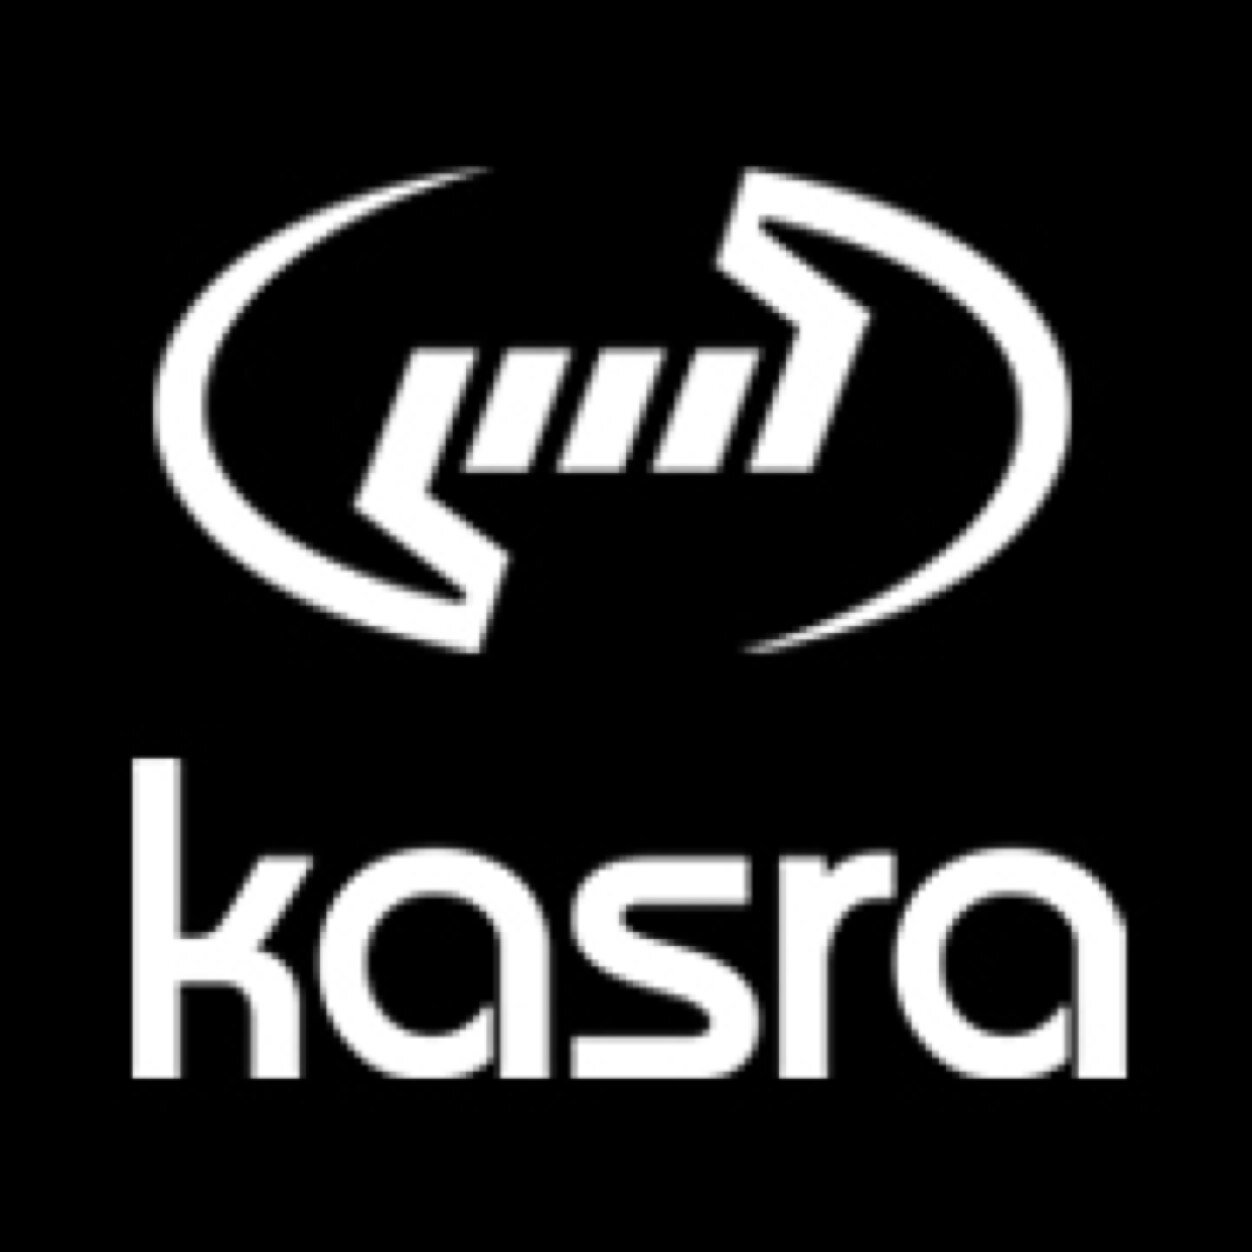 welcome to the official kasra page! ask us questions,share your thoughts & keep up on the latest news , products & design.